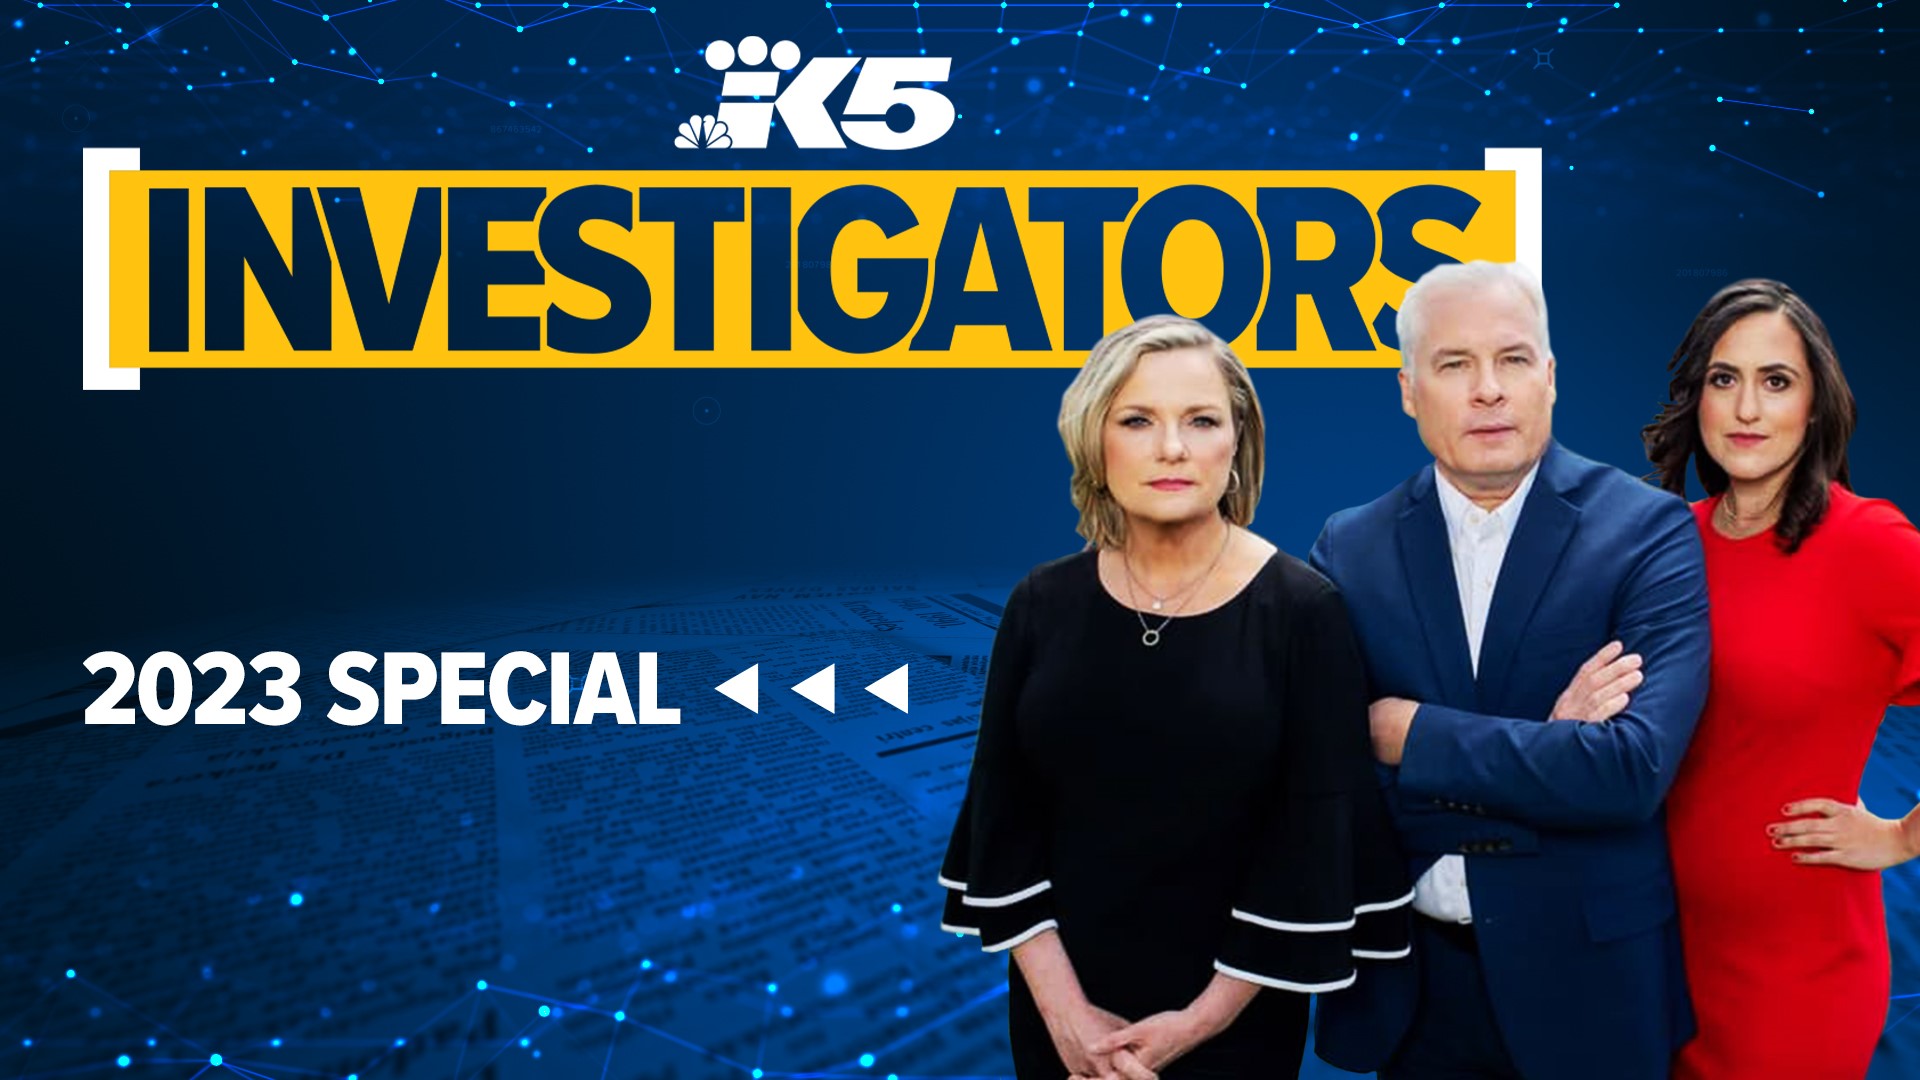 A look back at some of the stories covered by the KING 5 Investigators in 2023